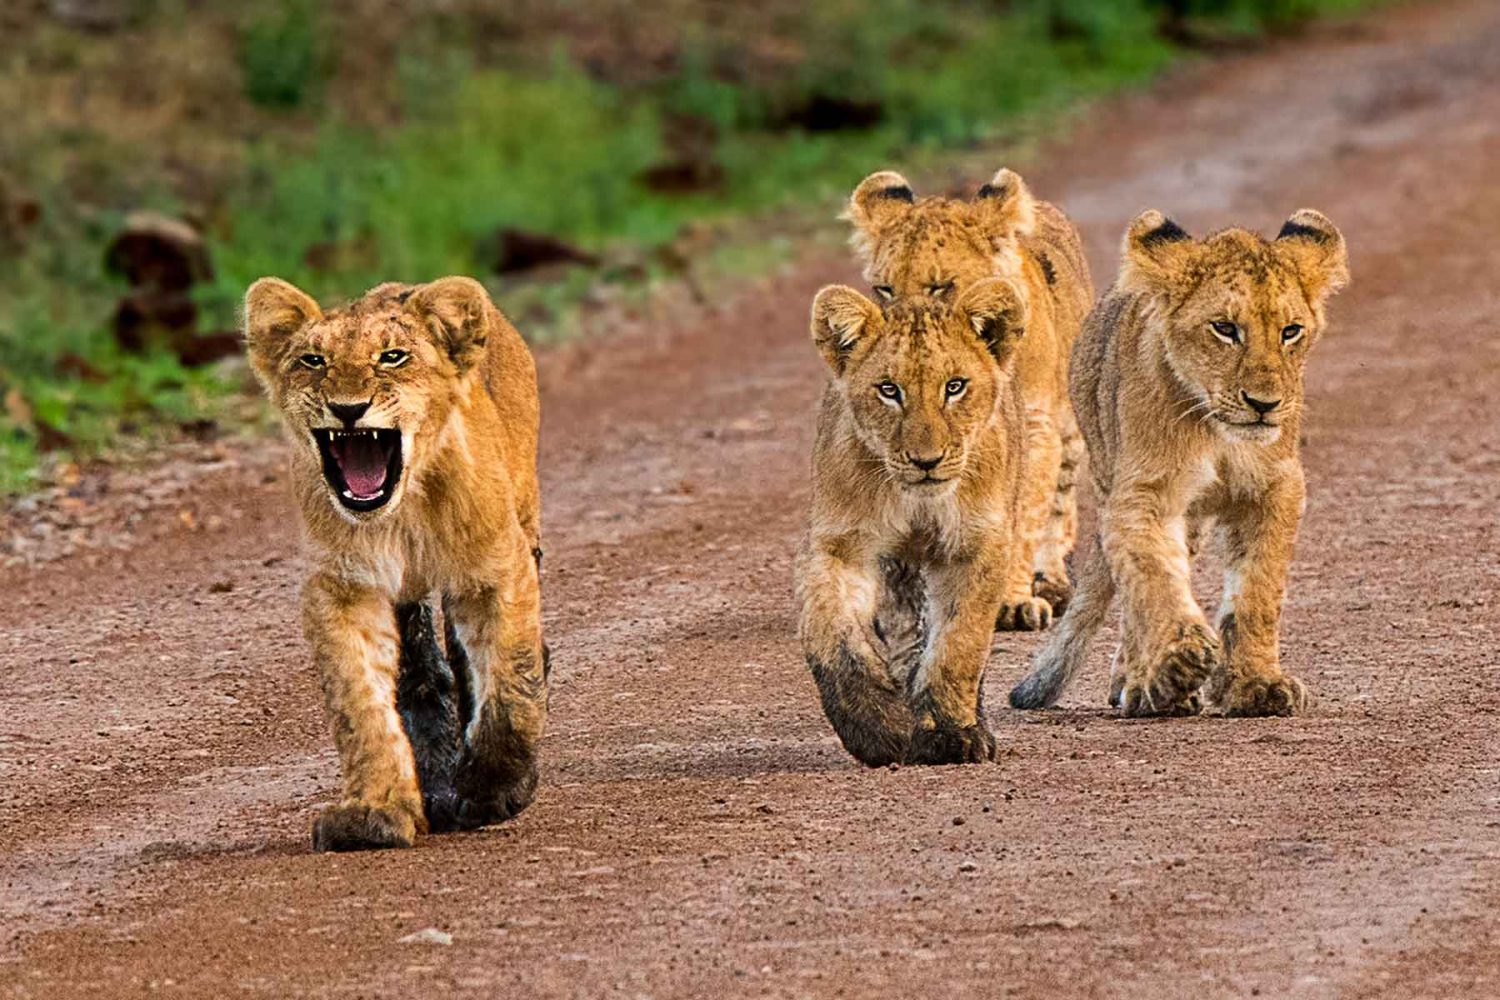 Here-we-Come-These-4-lion-cubs-were-just-strolling-down-a-dirt-road-in-Kenyas-Maasai-Mara-National-Park-1500x1000